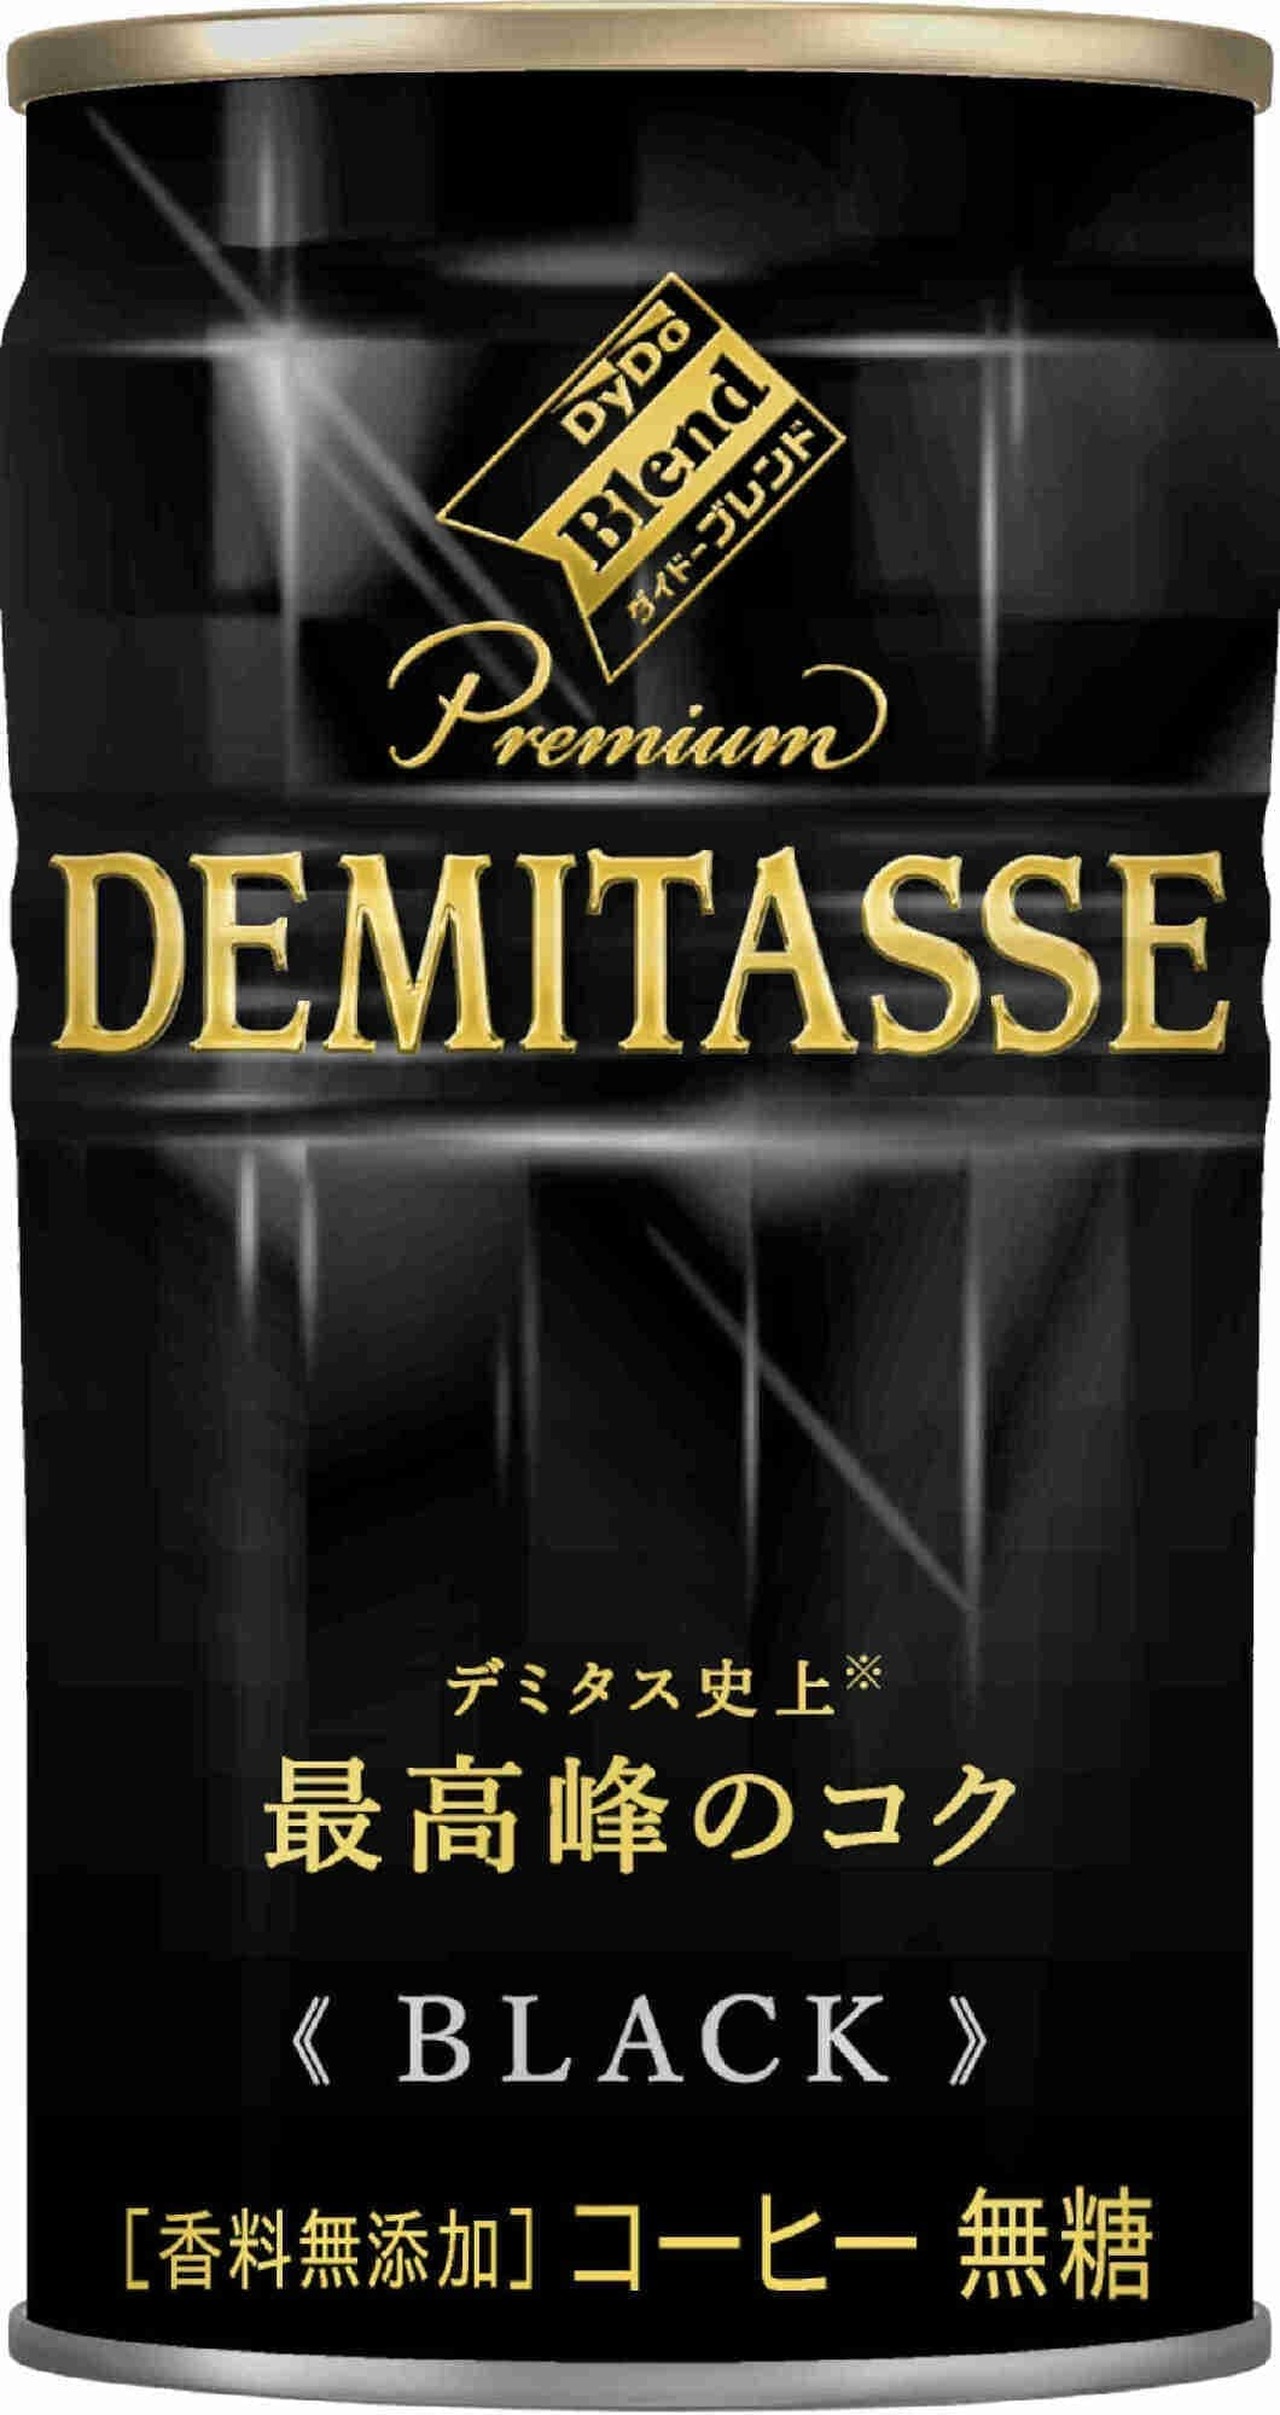 "Dydo Blend Premium Demitasse" 5 types of premium canned coffee with 1.5 times the amount of beans